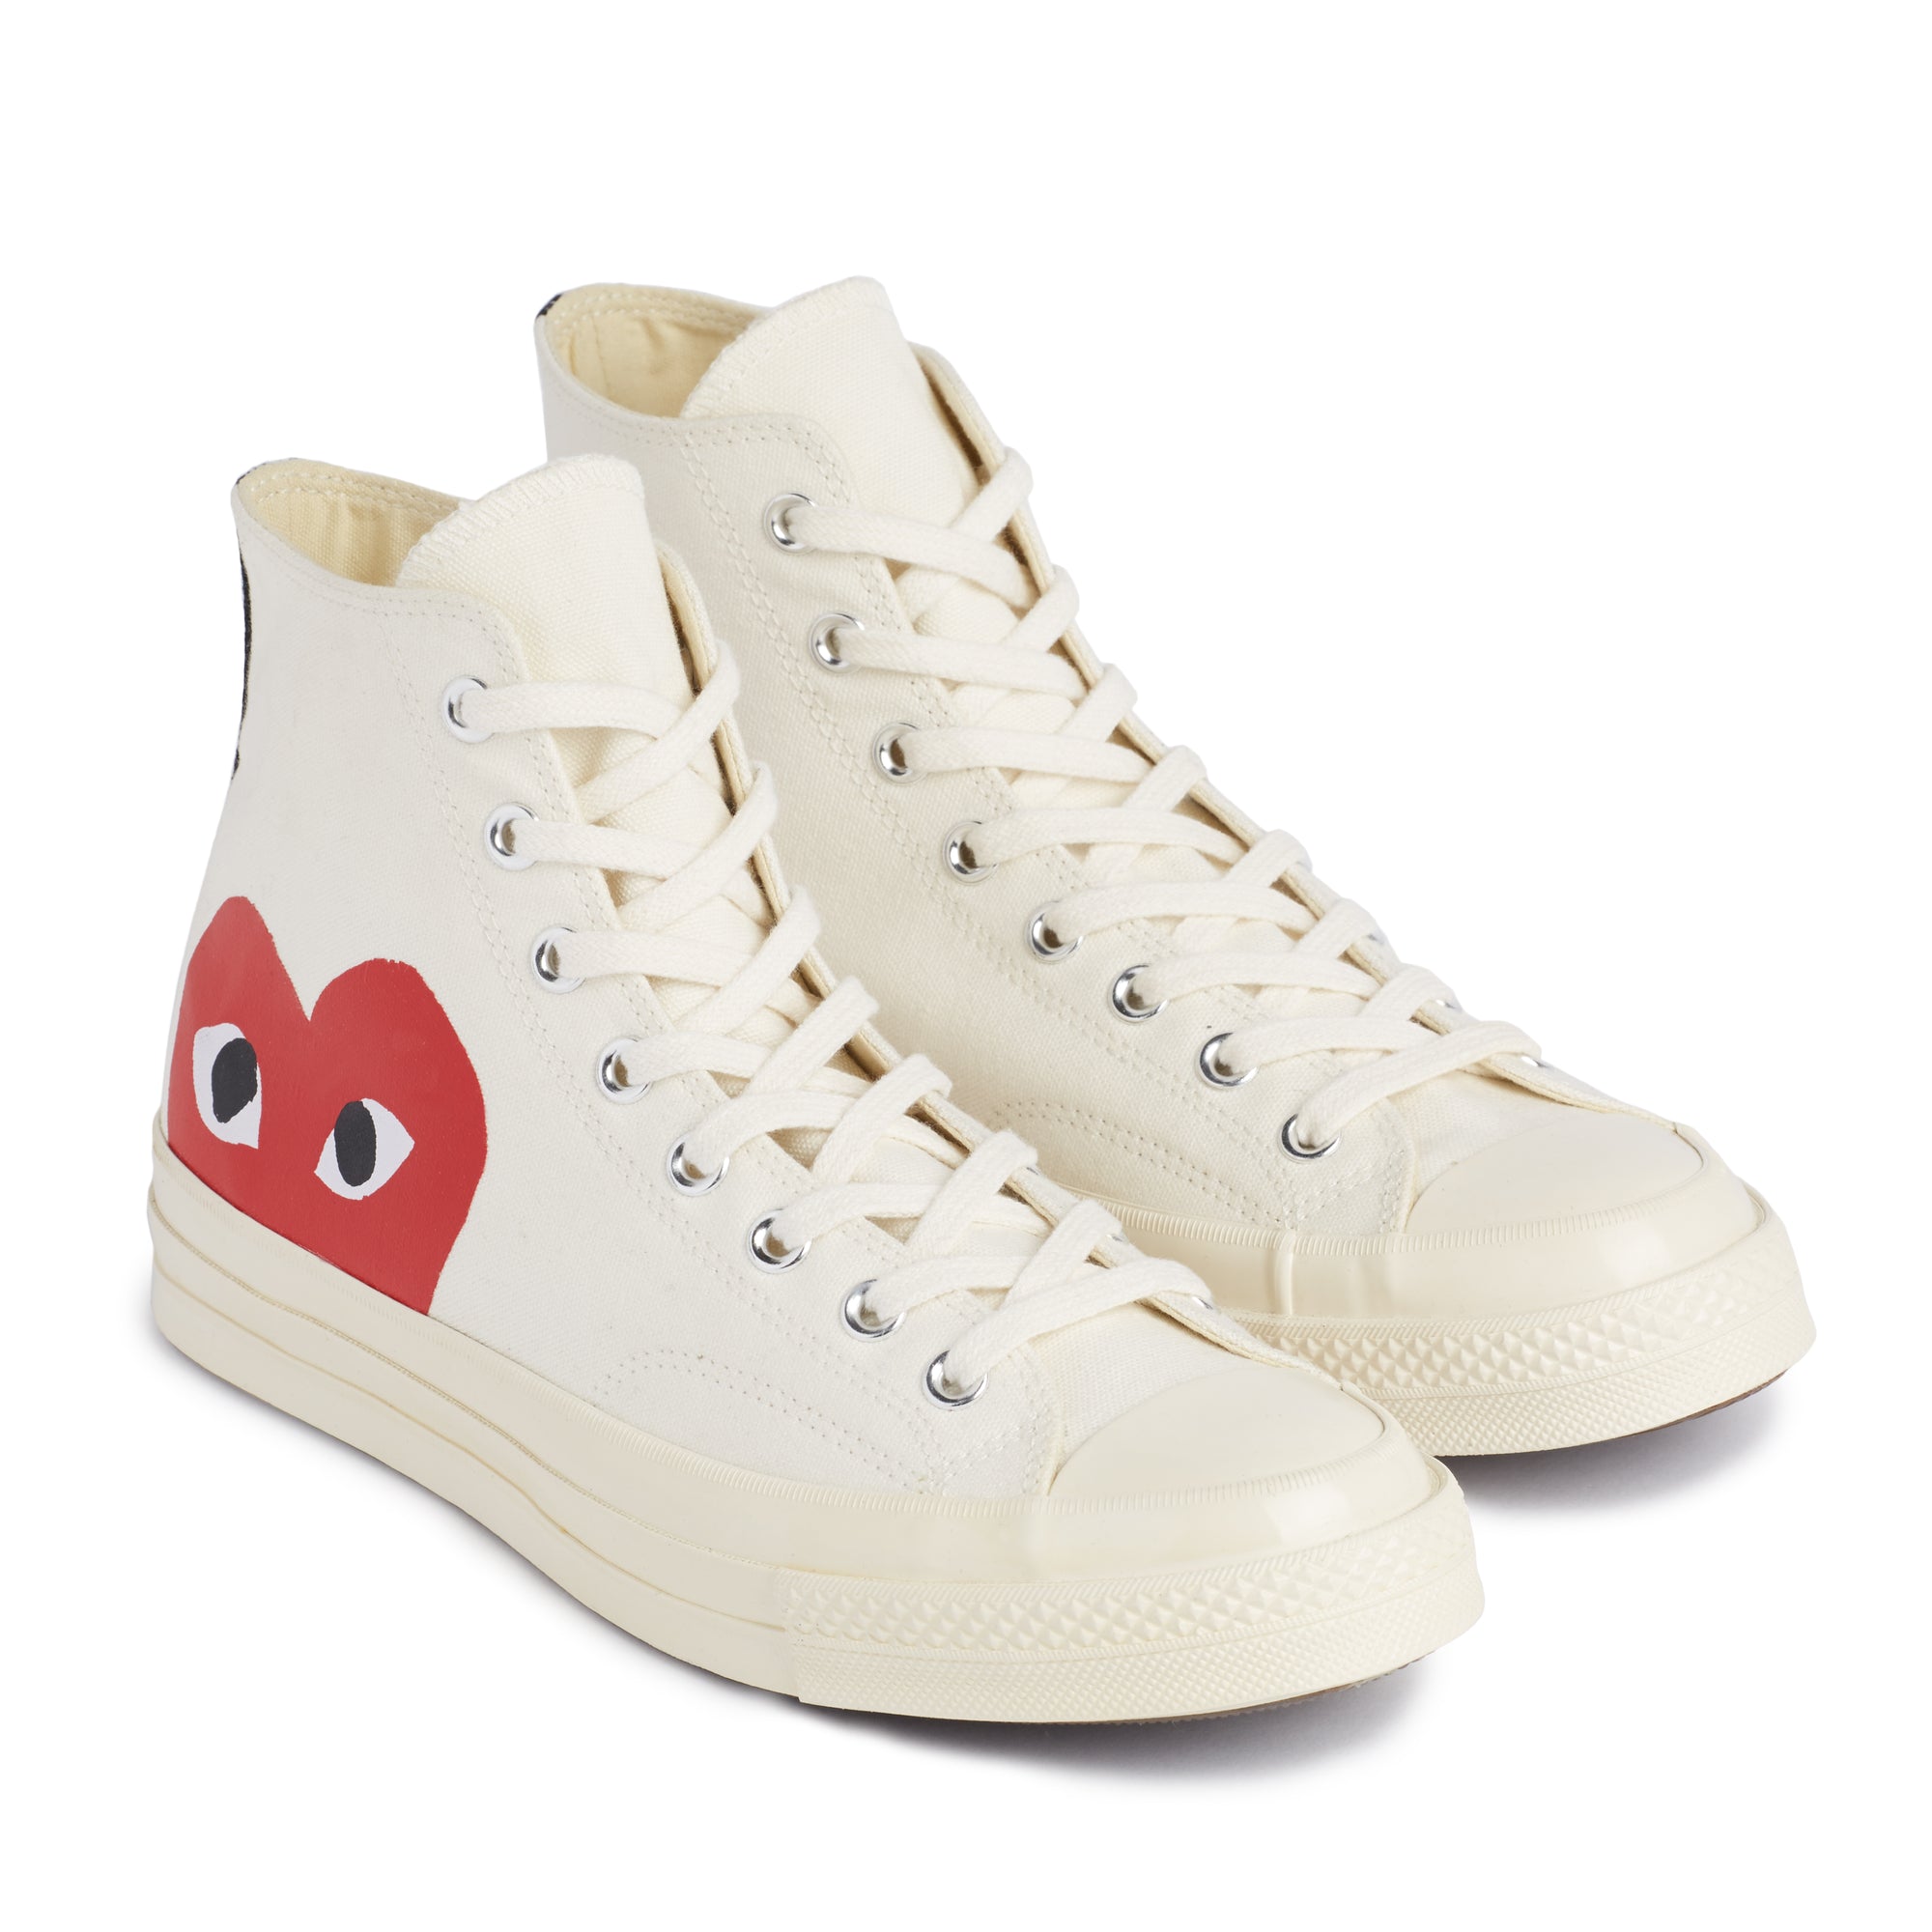 Converse Red Chuck Taylor All Star High Trainers